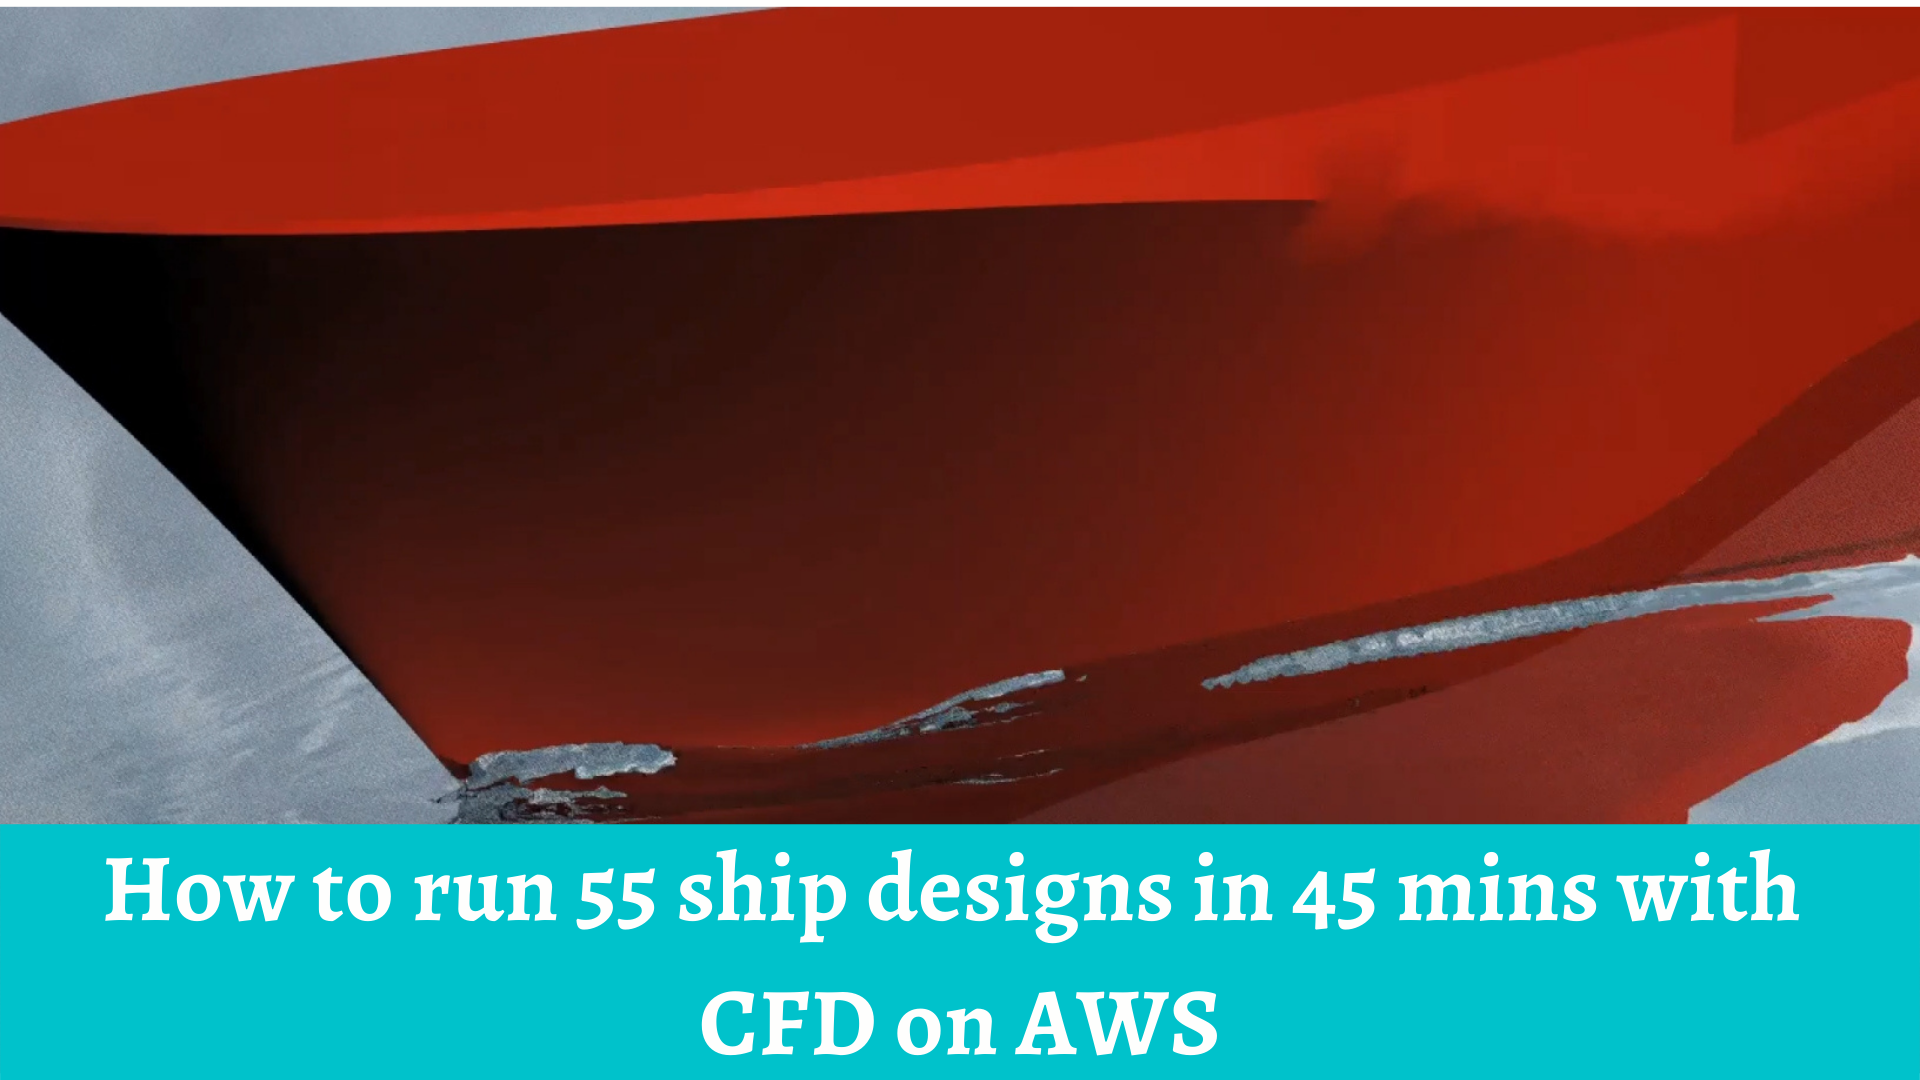 Ship design with CFD on AWS cloud